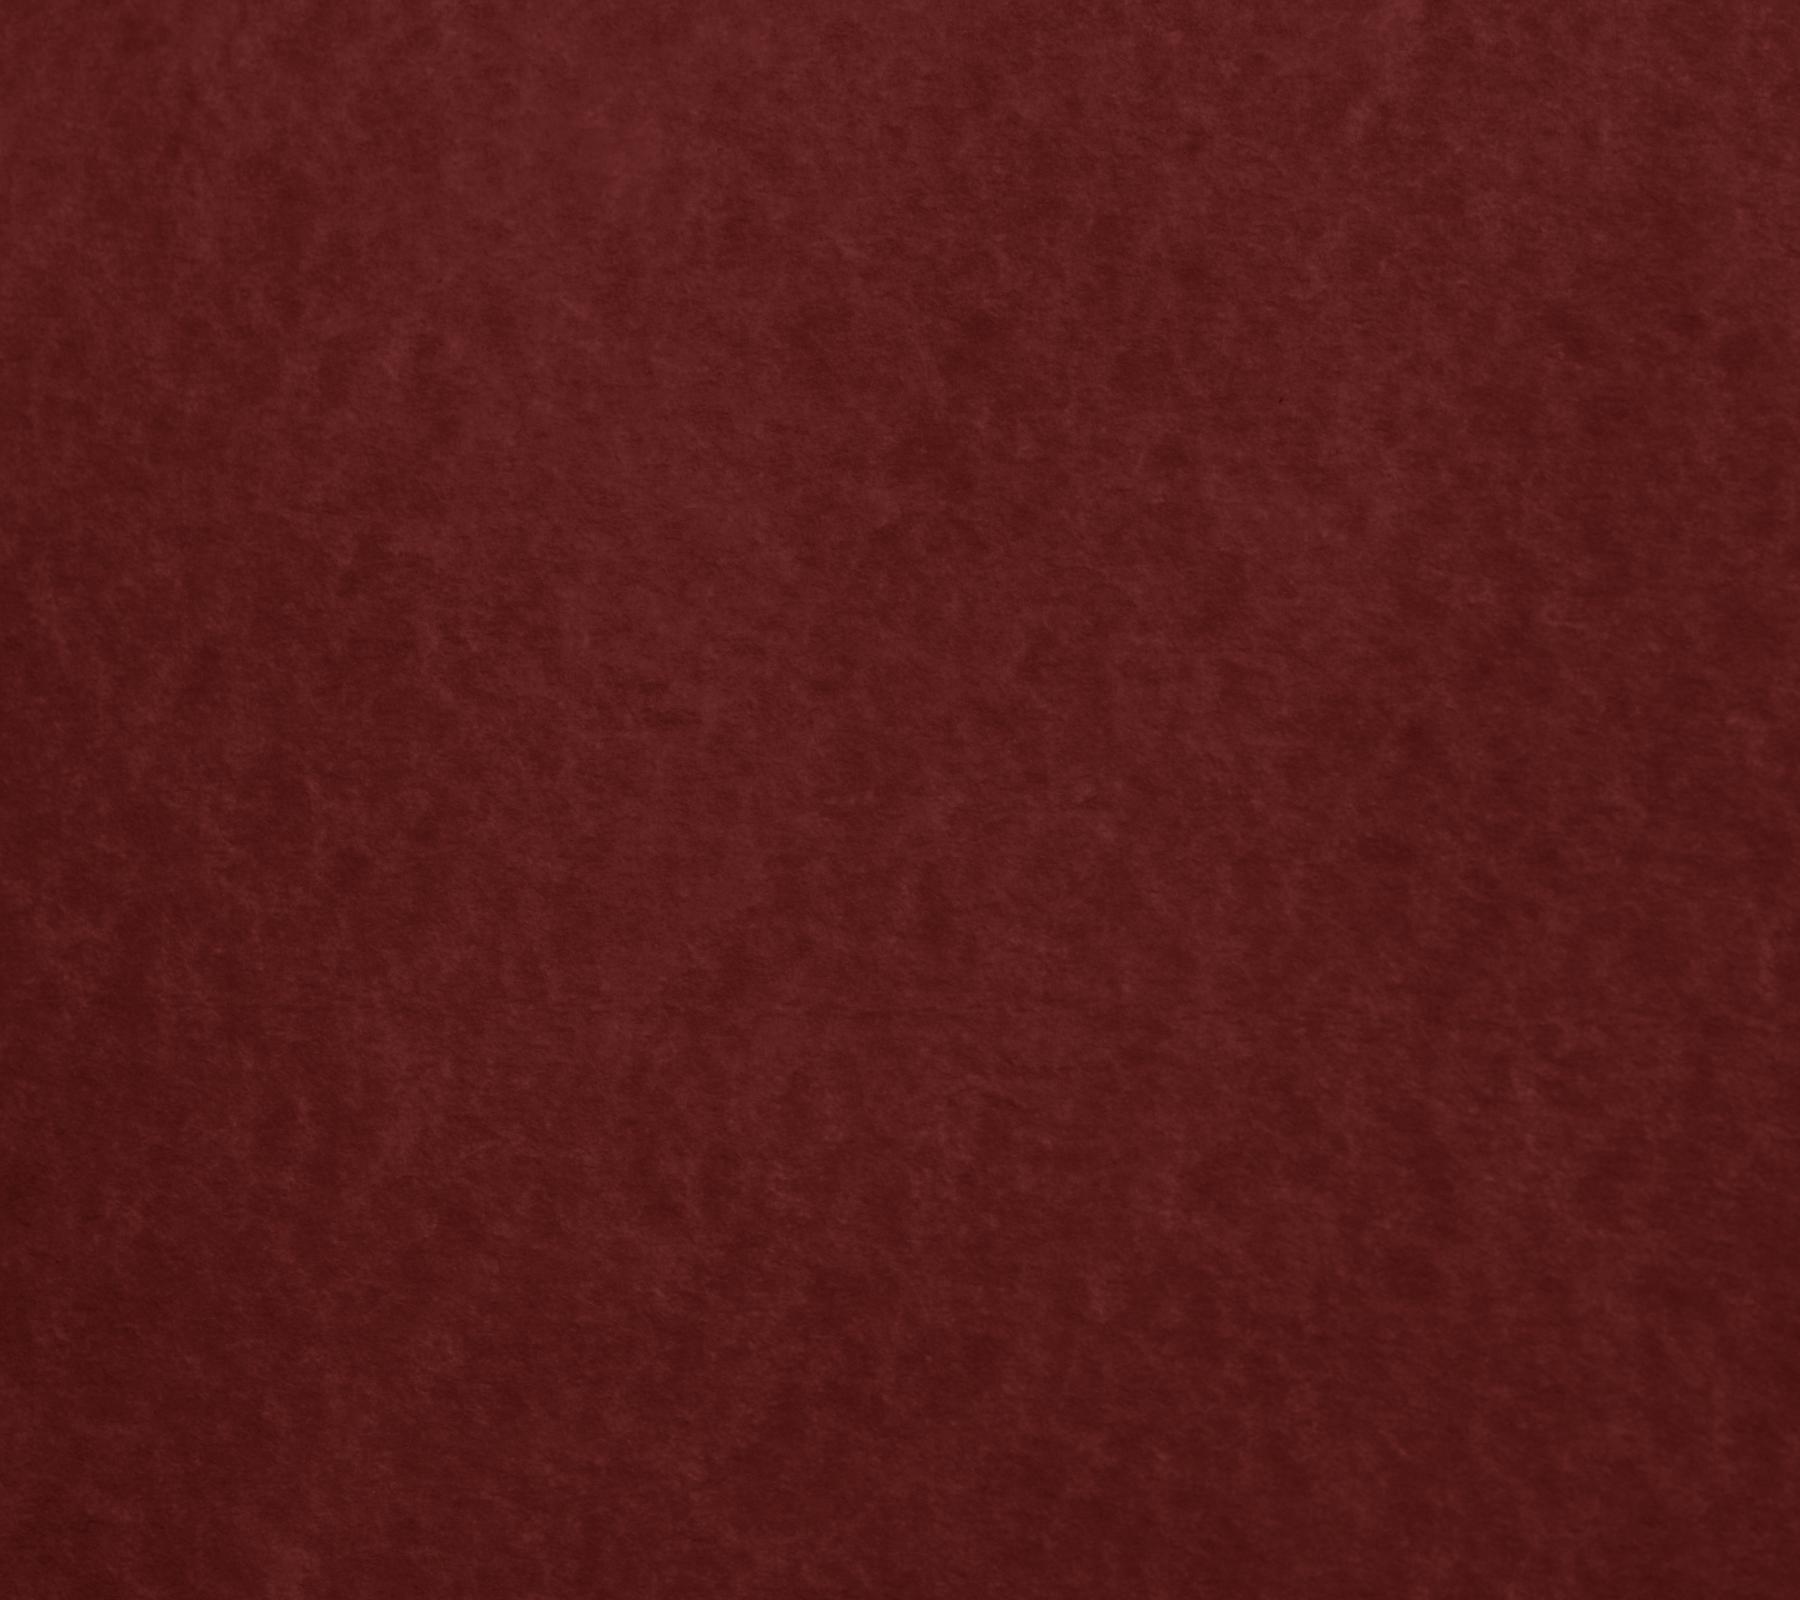 Maroon Parchment Paper Background Image